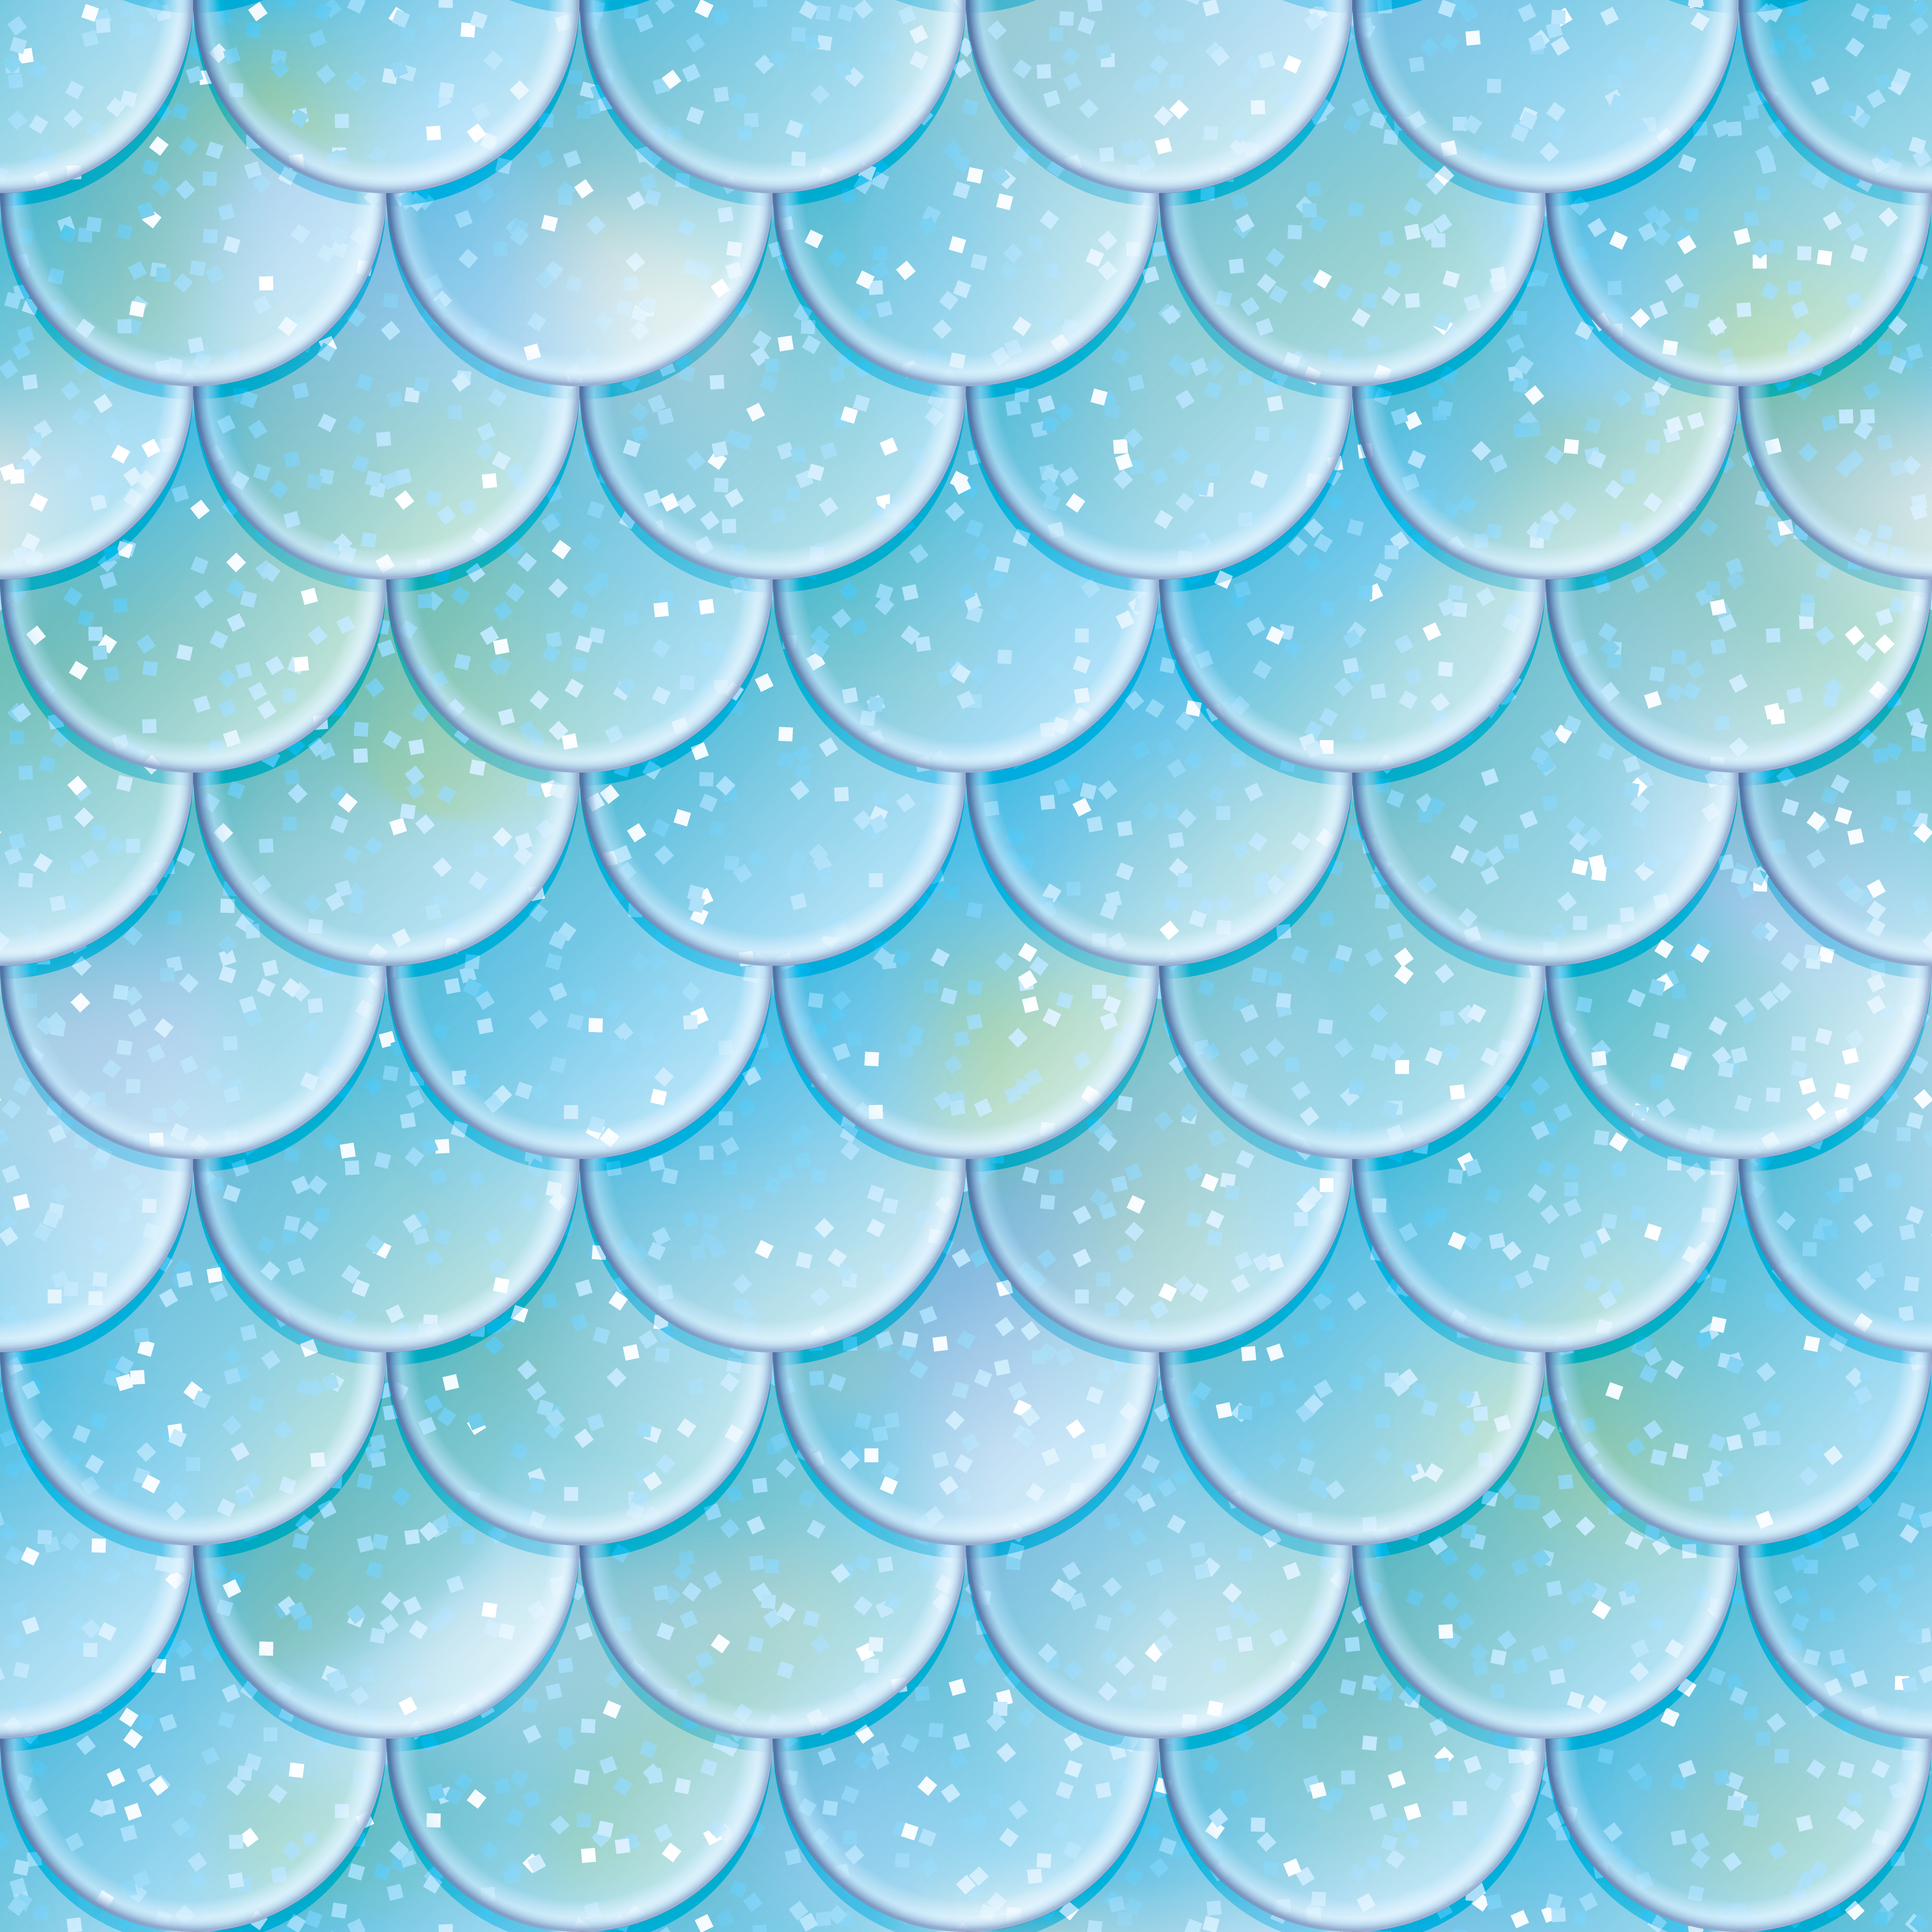 Download Mermaid Scales Vector at Vectorified.com | Collection of ...